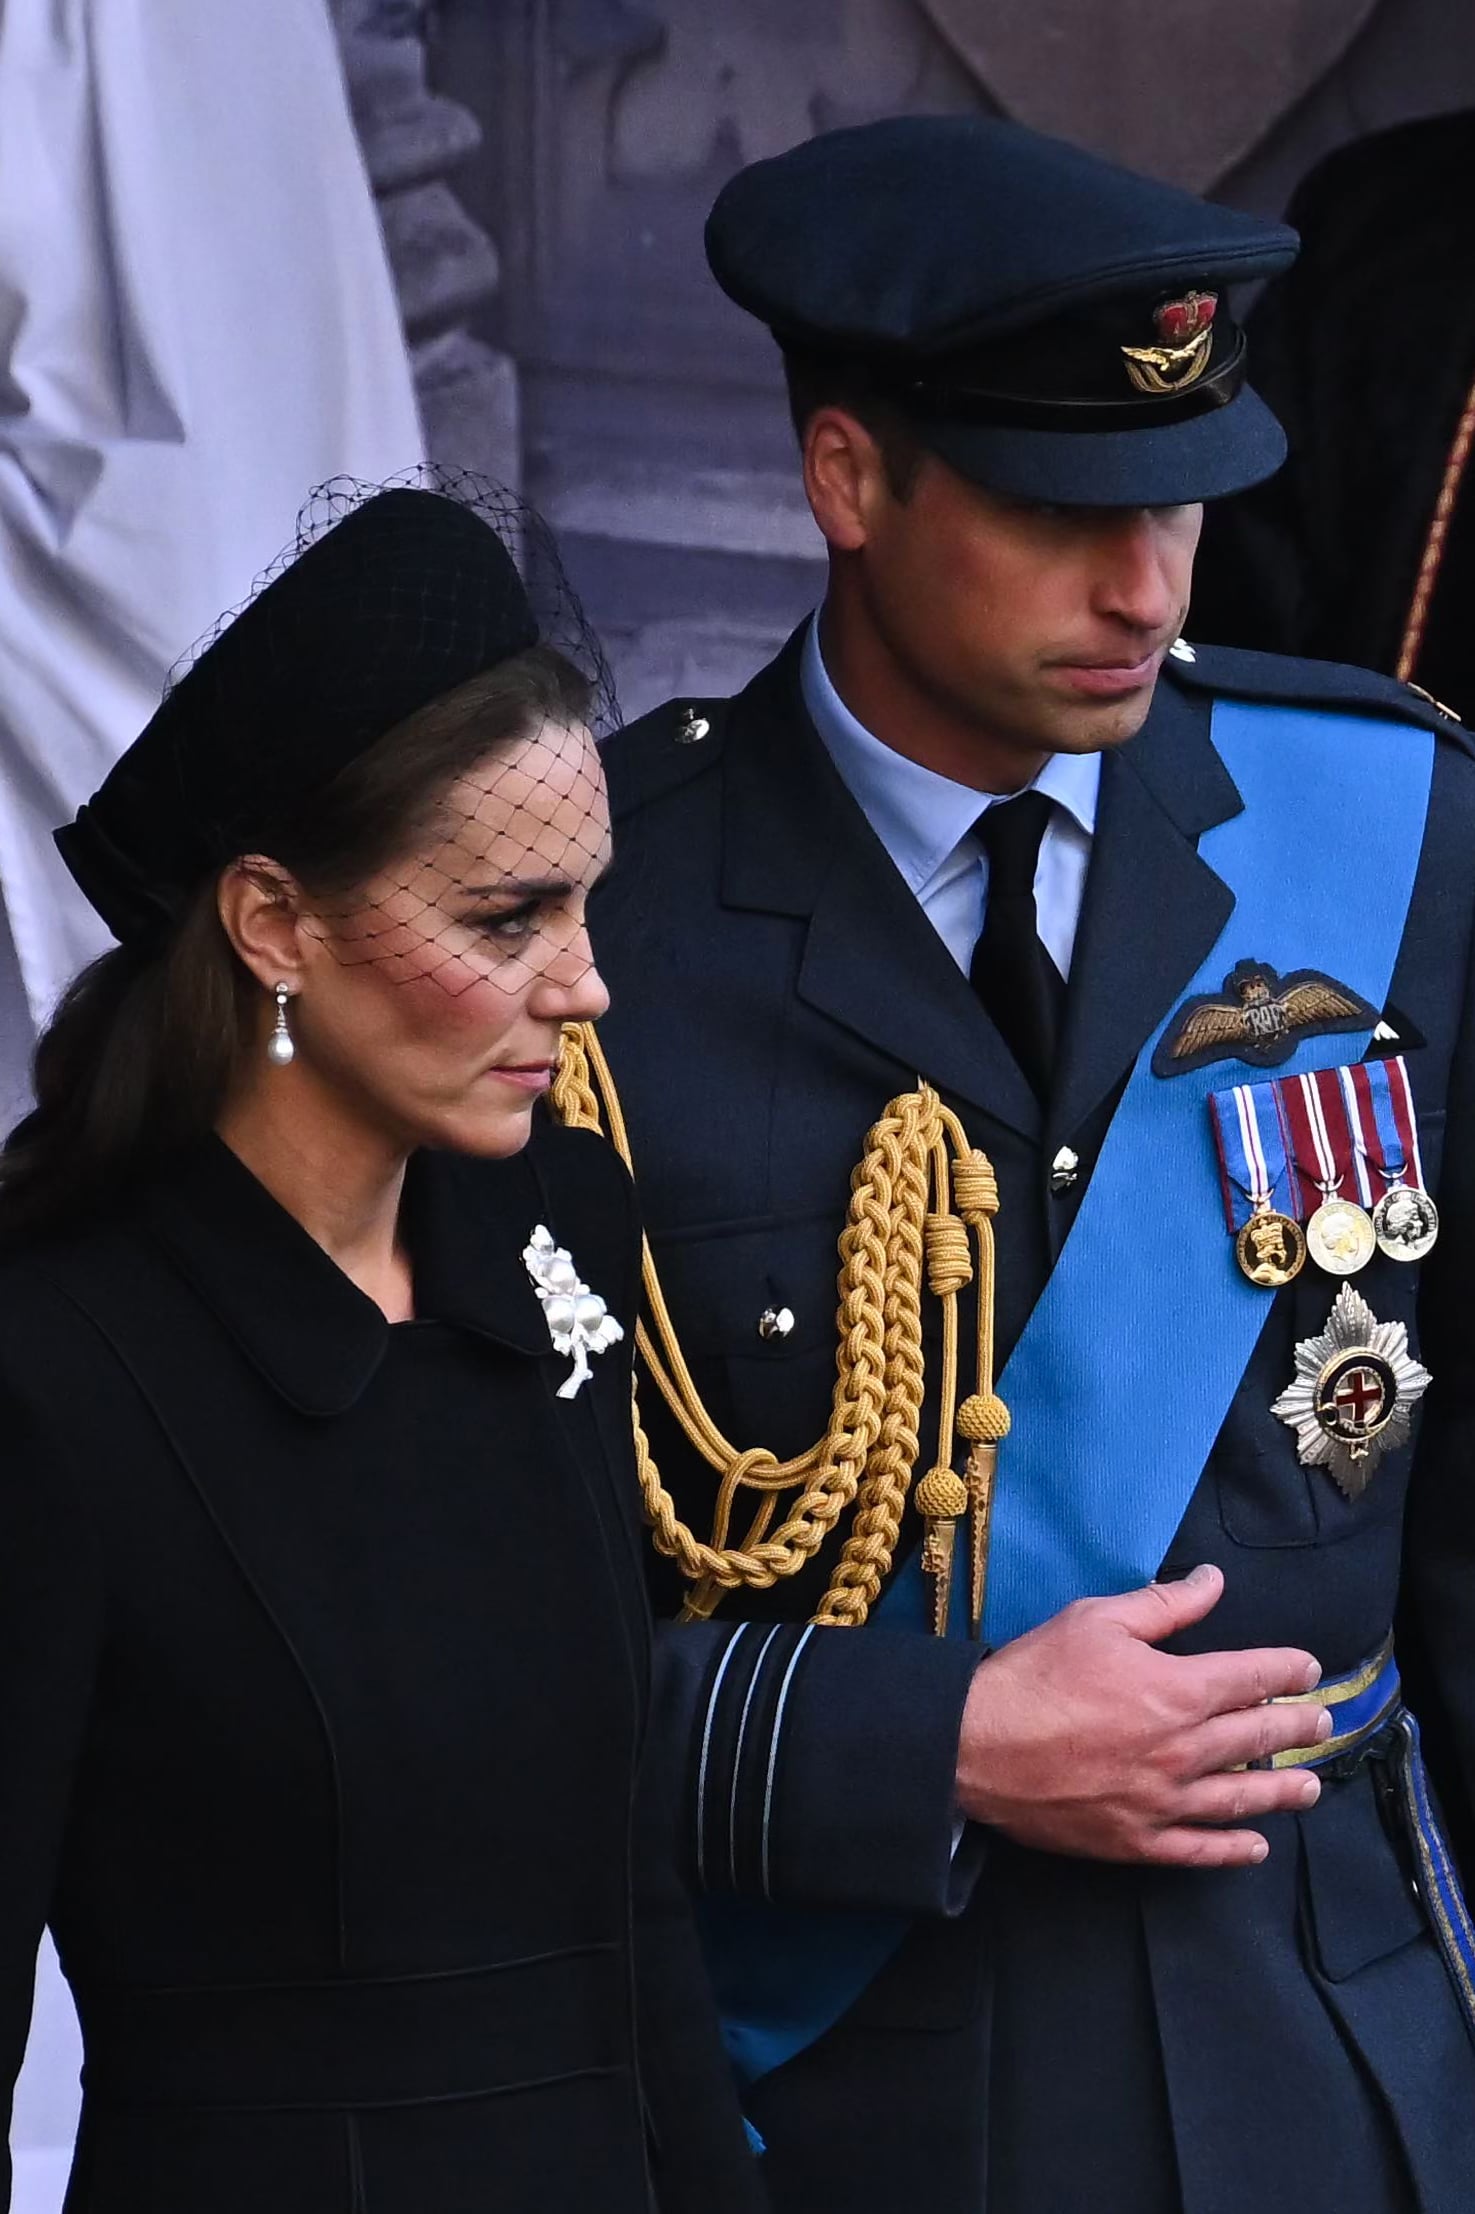 LONDON, ENGLAND - SEPTEMBER 14:  Catherine, Princess of Wales and Prince William, Prince of Wales leave after a service for the reception of Queen Elizabeth II's coffin at Westminster Hall, on September 14, 2022 in London, United Kingdom. Queen Elizabeth II's coffin is taken in procession on a Gun Carriage of The King's Troop Royal Horse Artillery from Buckingham Palace to Westminster Hall where she will lay in state until the early morning of her funeral. Queen Elizabeth II died at Balmoral Castle in Scotland on September 8, 2022, and is succeeded by her eldest son, King Charles III. (Photo by Ben Stansall - WPA Pool/Getty Images)